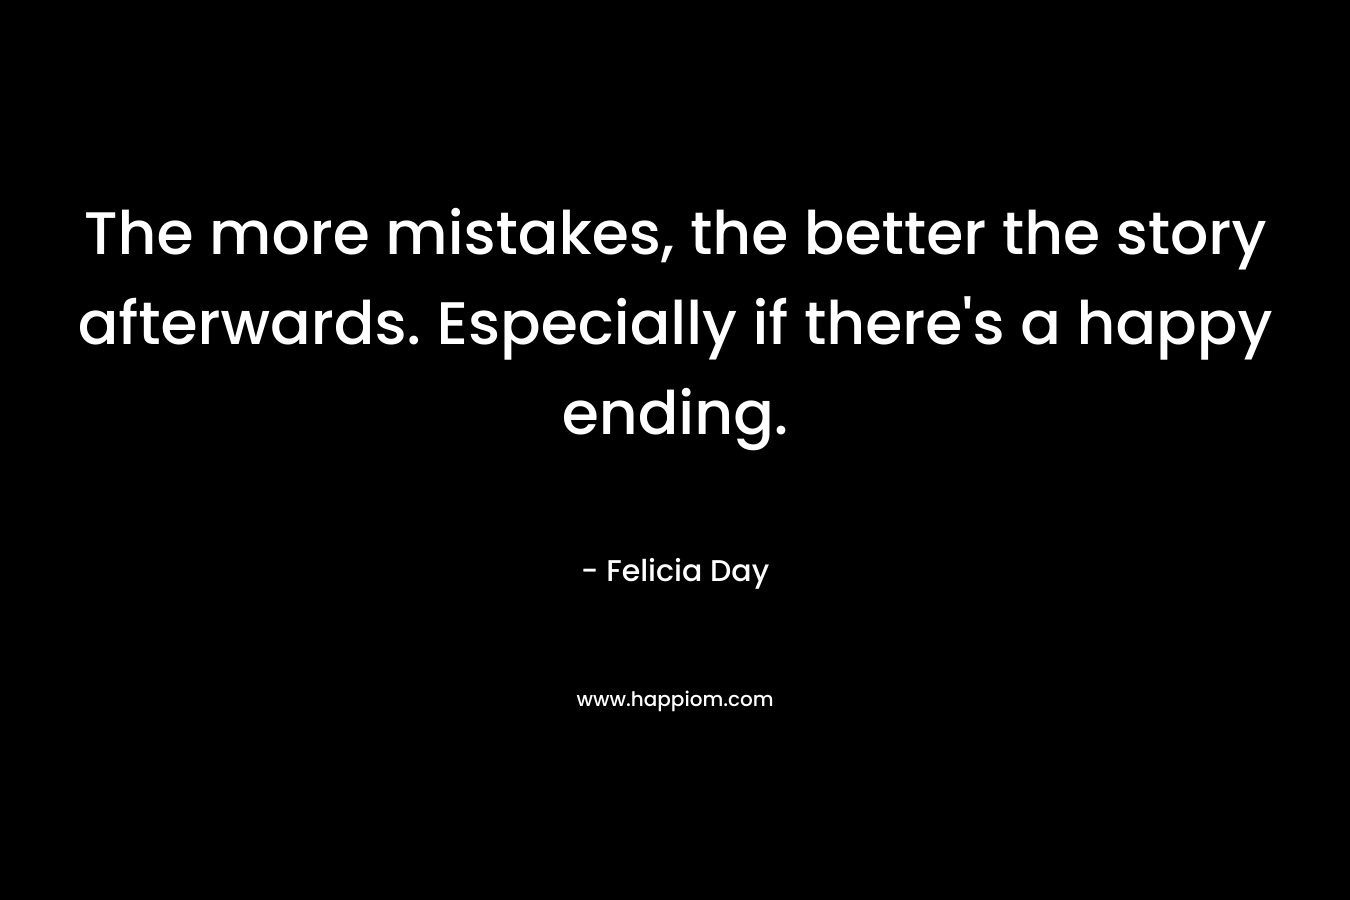 The more mistakes, the better the story afterwards. Especially if there’s a happy ending. – Felicia Day